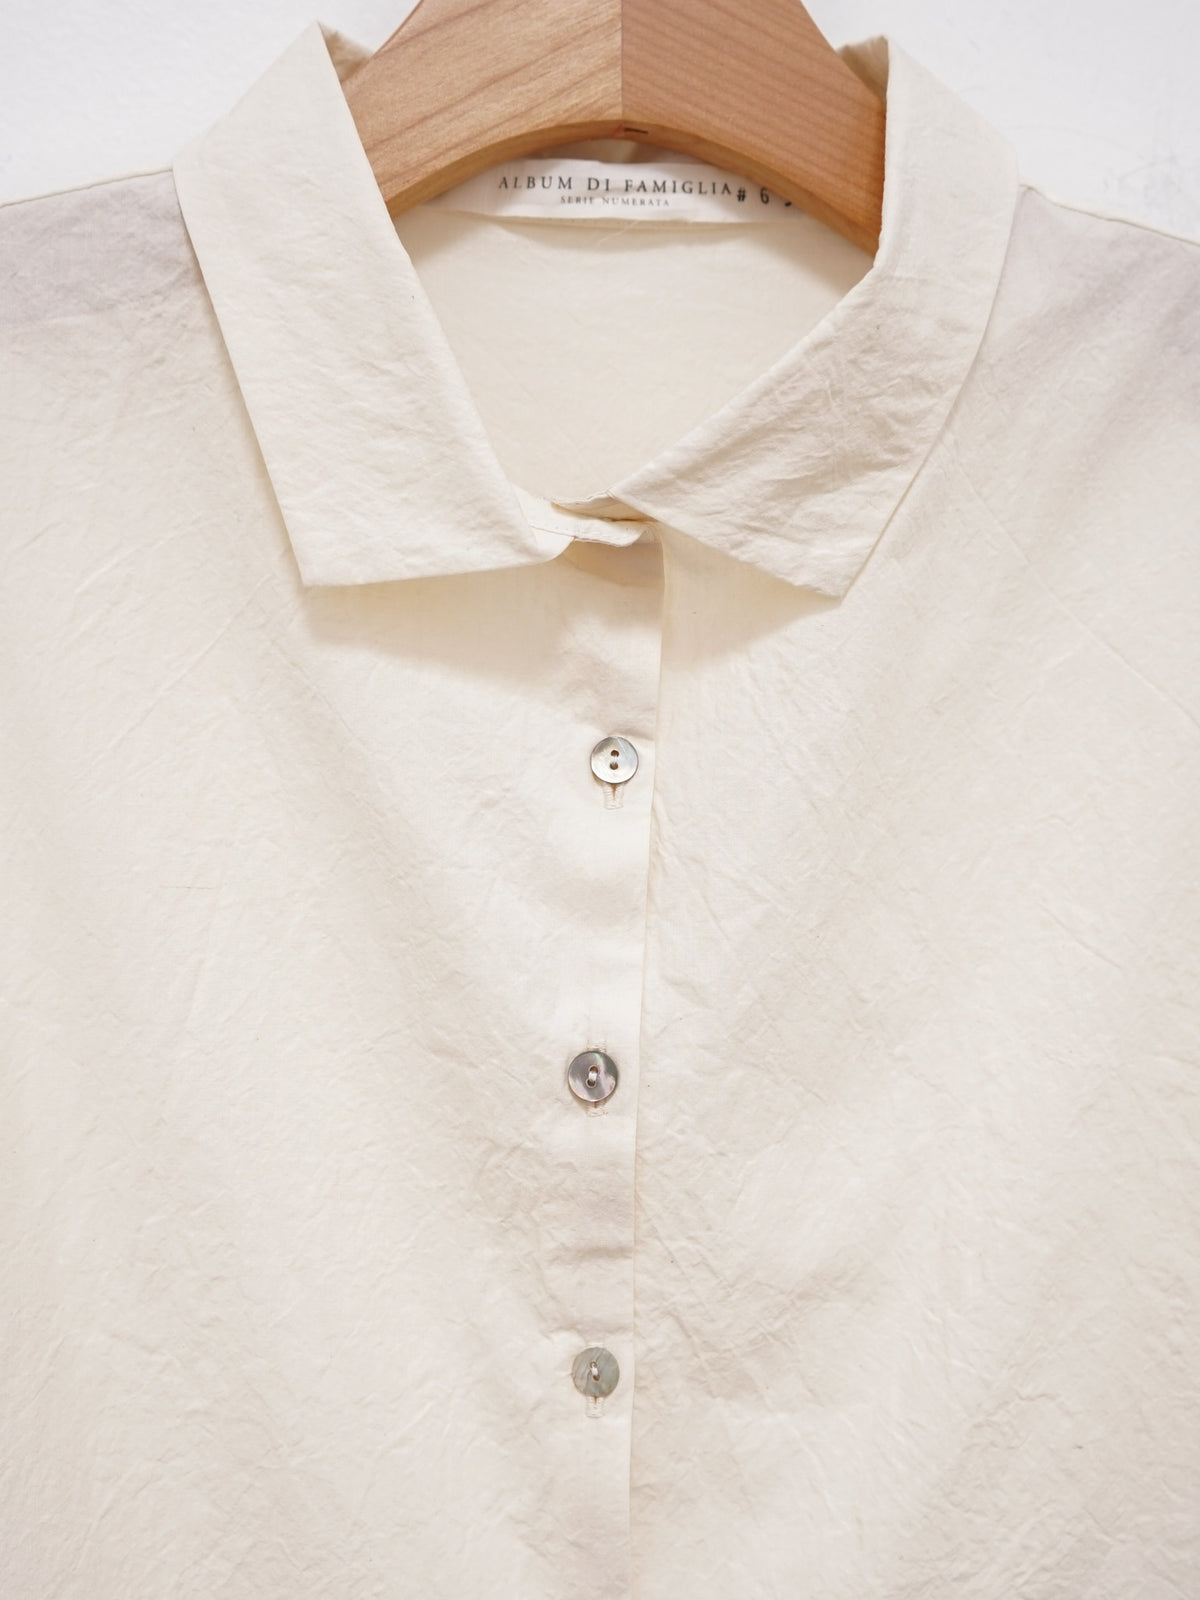 We offer a large selection of Wrinkled Collar Shirt - Natural